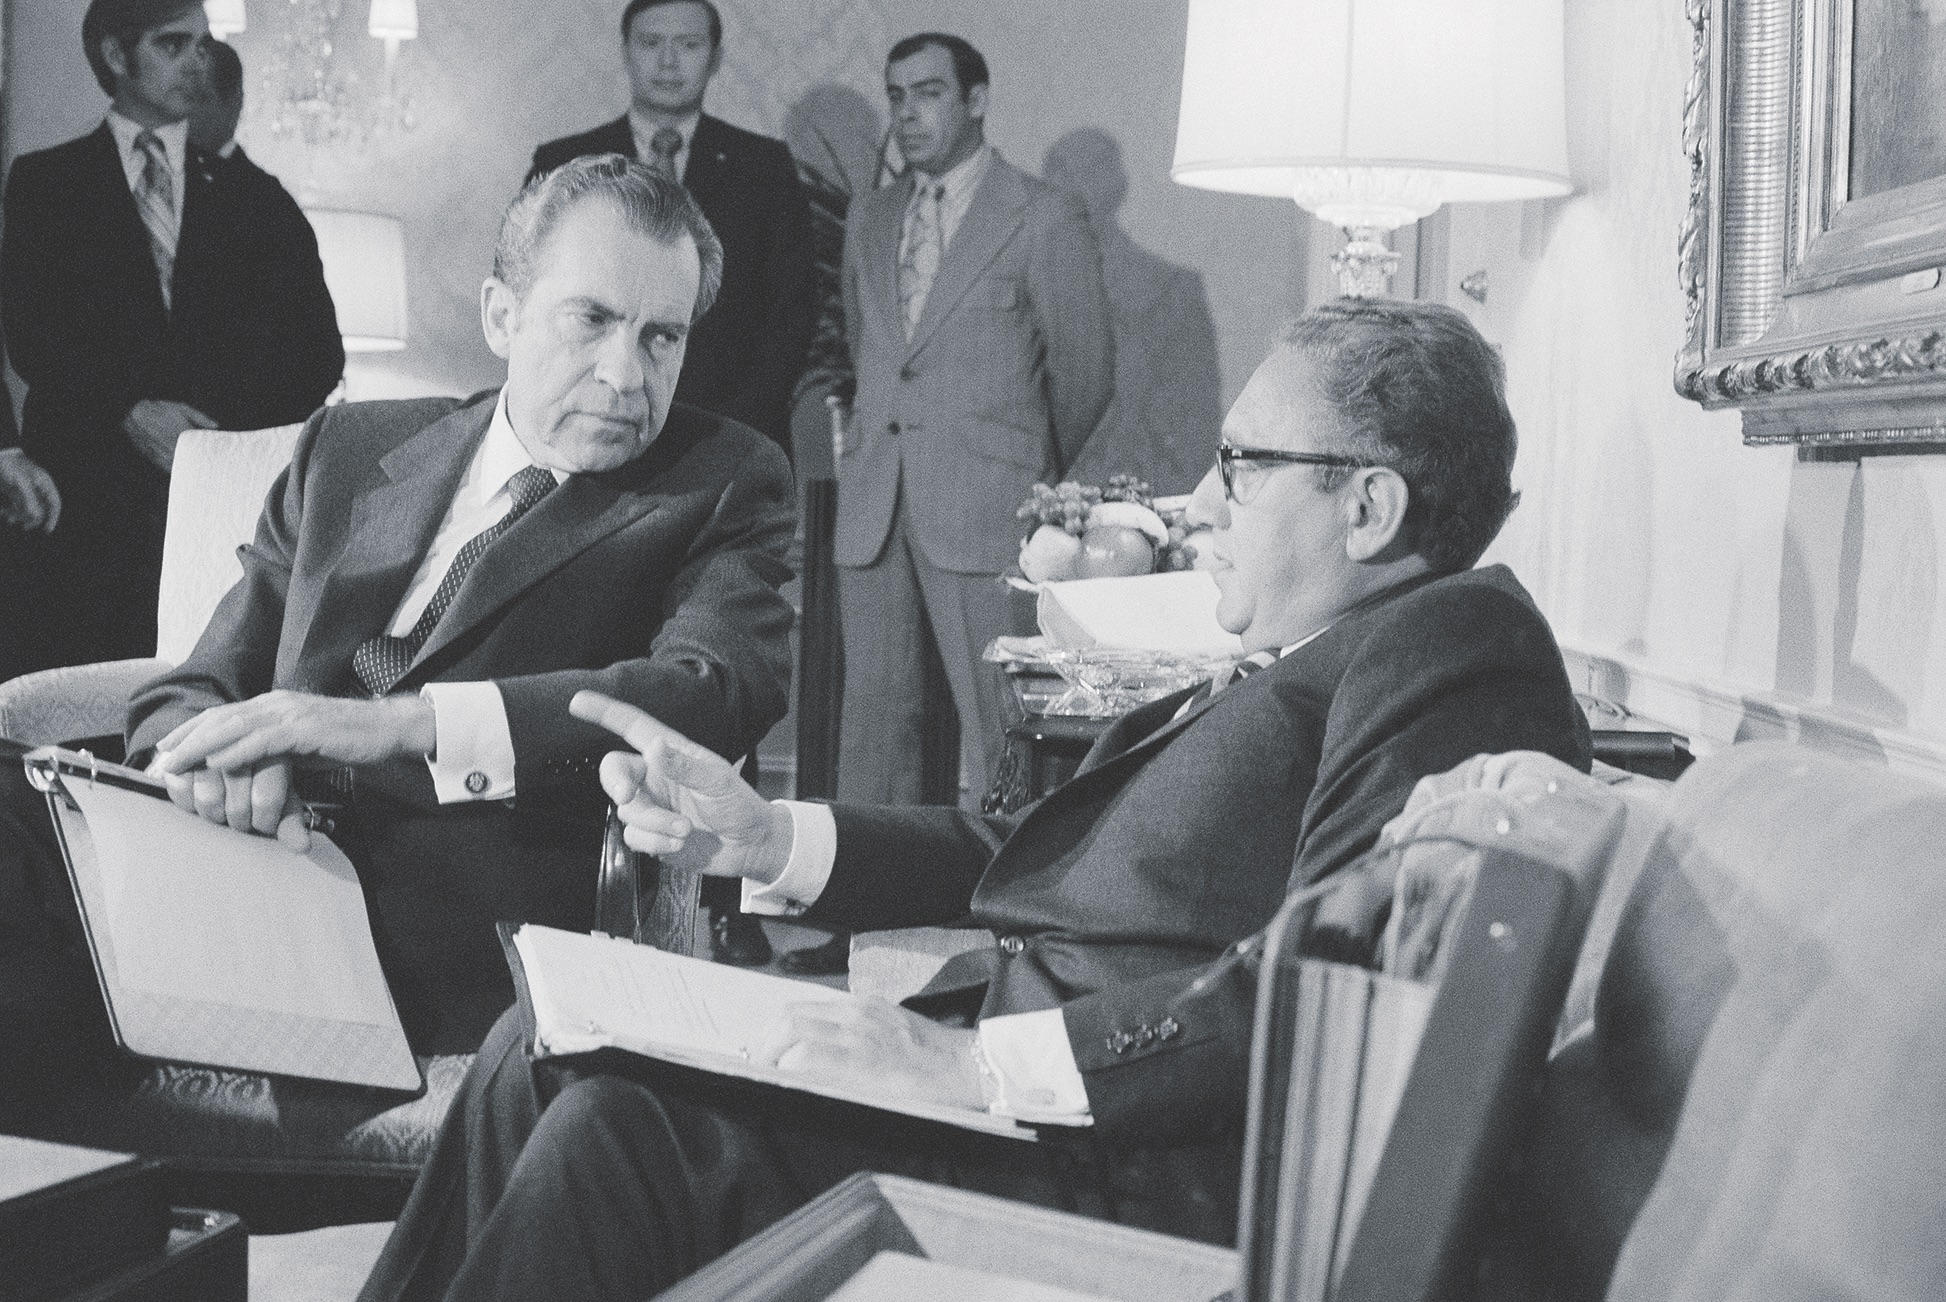 Richard Nixon gets a briefing on the Paris peace talks from Henry Kissinger during a consultation at a New York hotel on Nov. 25, 1972. (Bettmann/Getty Images)